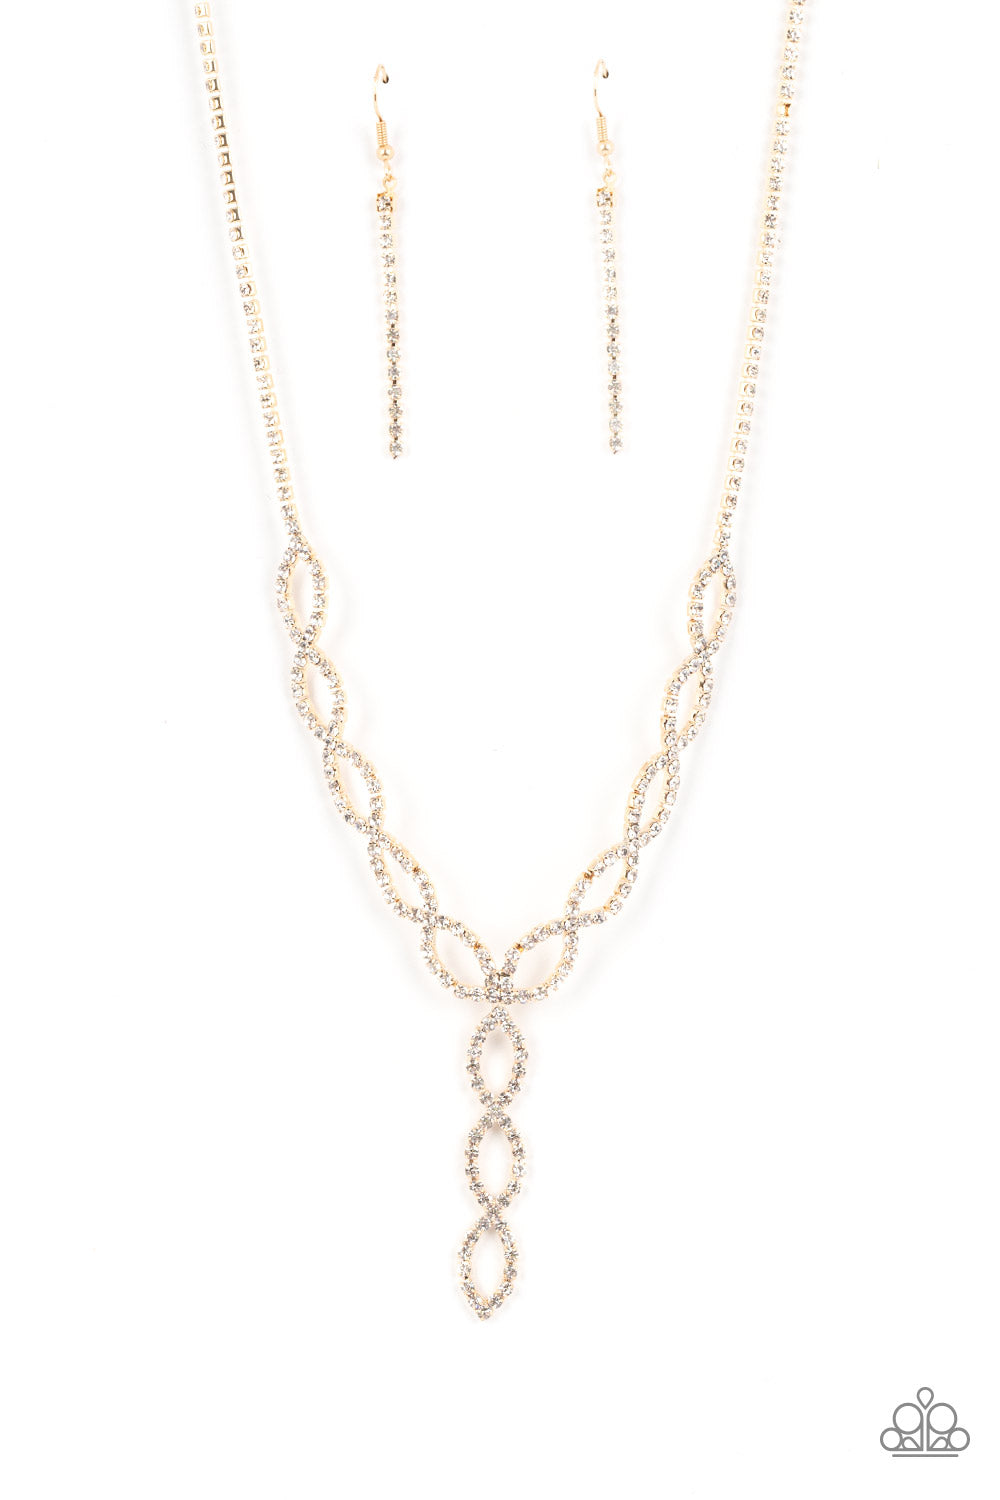 Infinitely Icy Necklace (Multi, White, Gold)